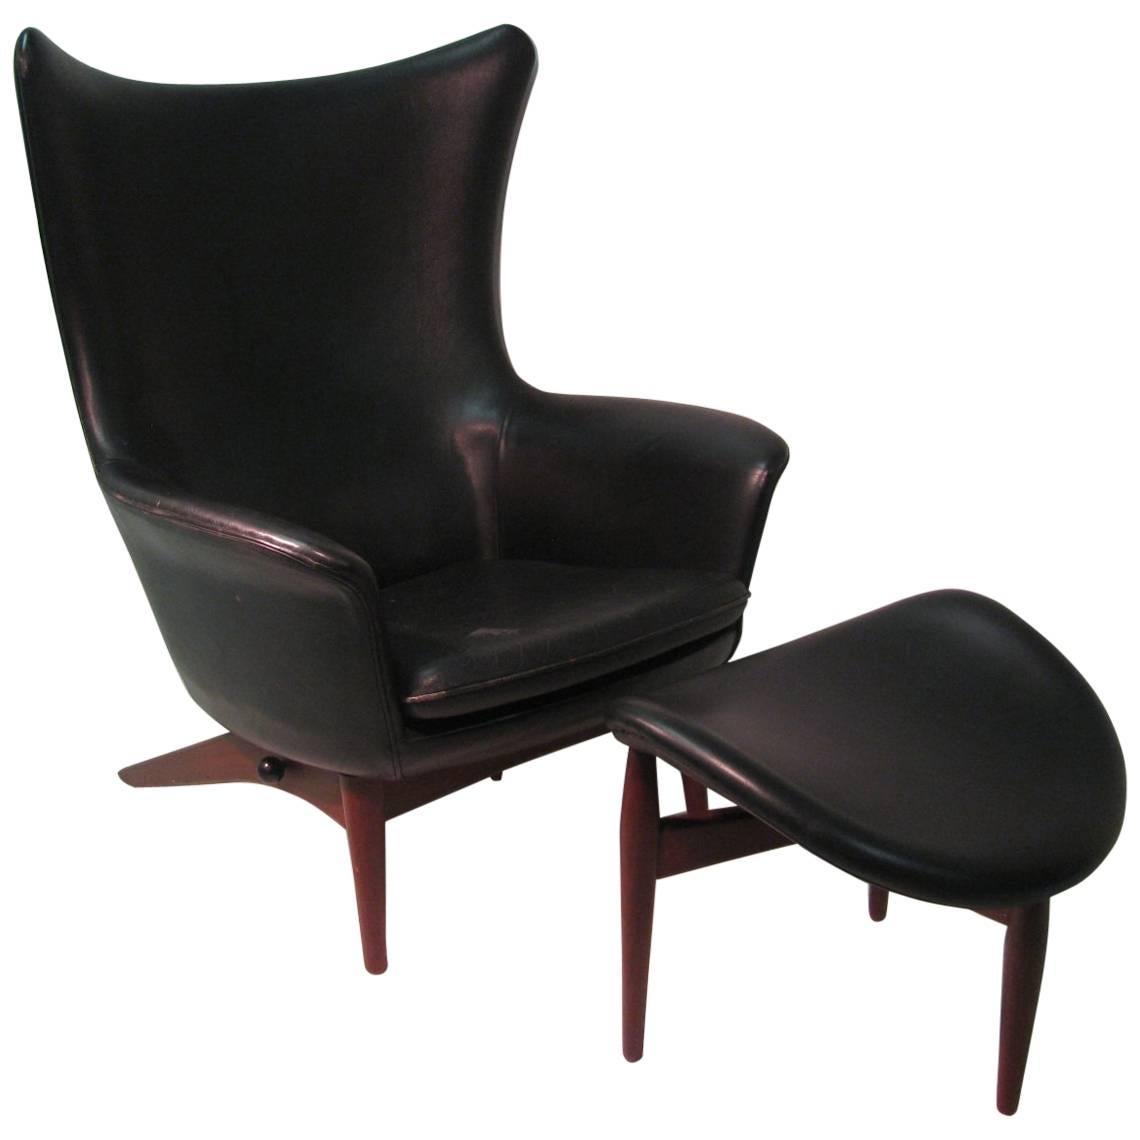 H. W. Klein Mid-Century Modern Reclining Leather Lounge Chair with Ottoman